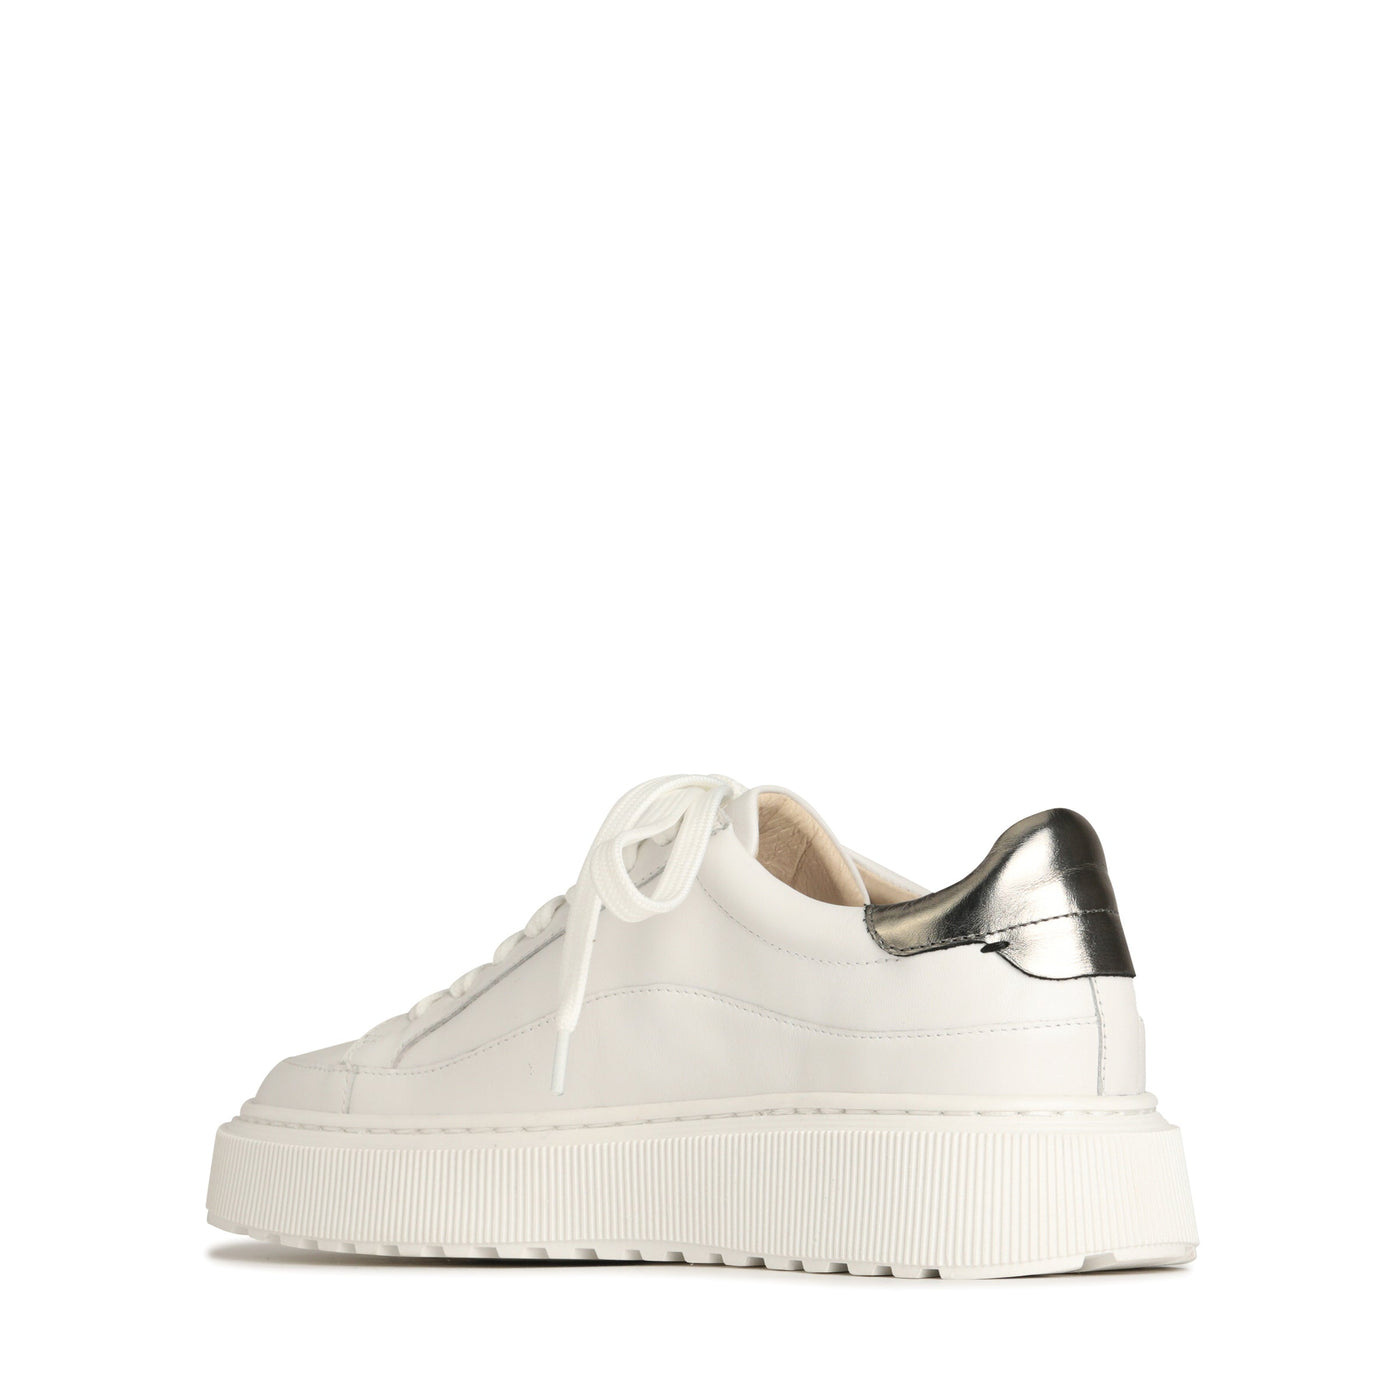 EOS LAELA WHITE PEWTER - Women sneakers - Collective Shoes 